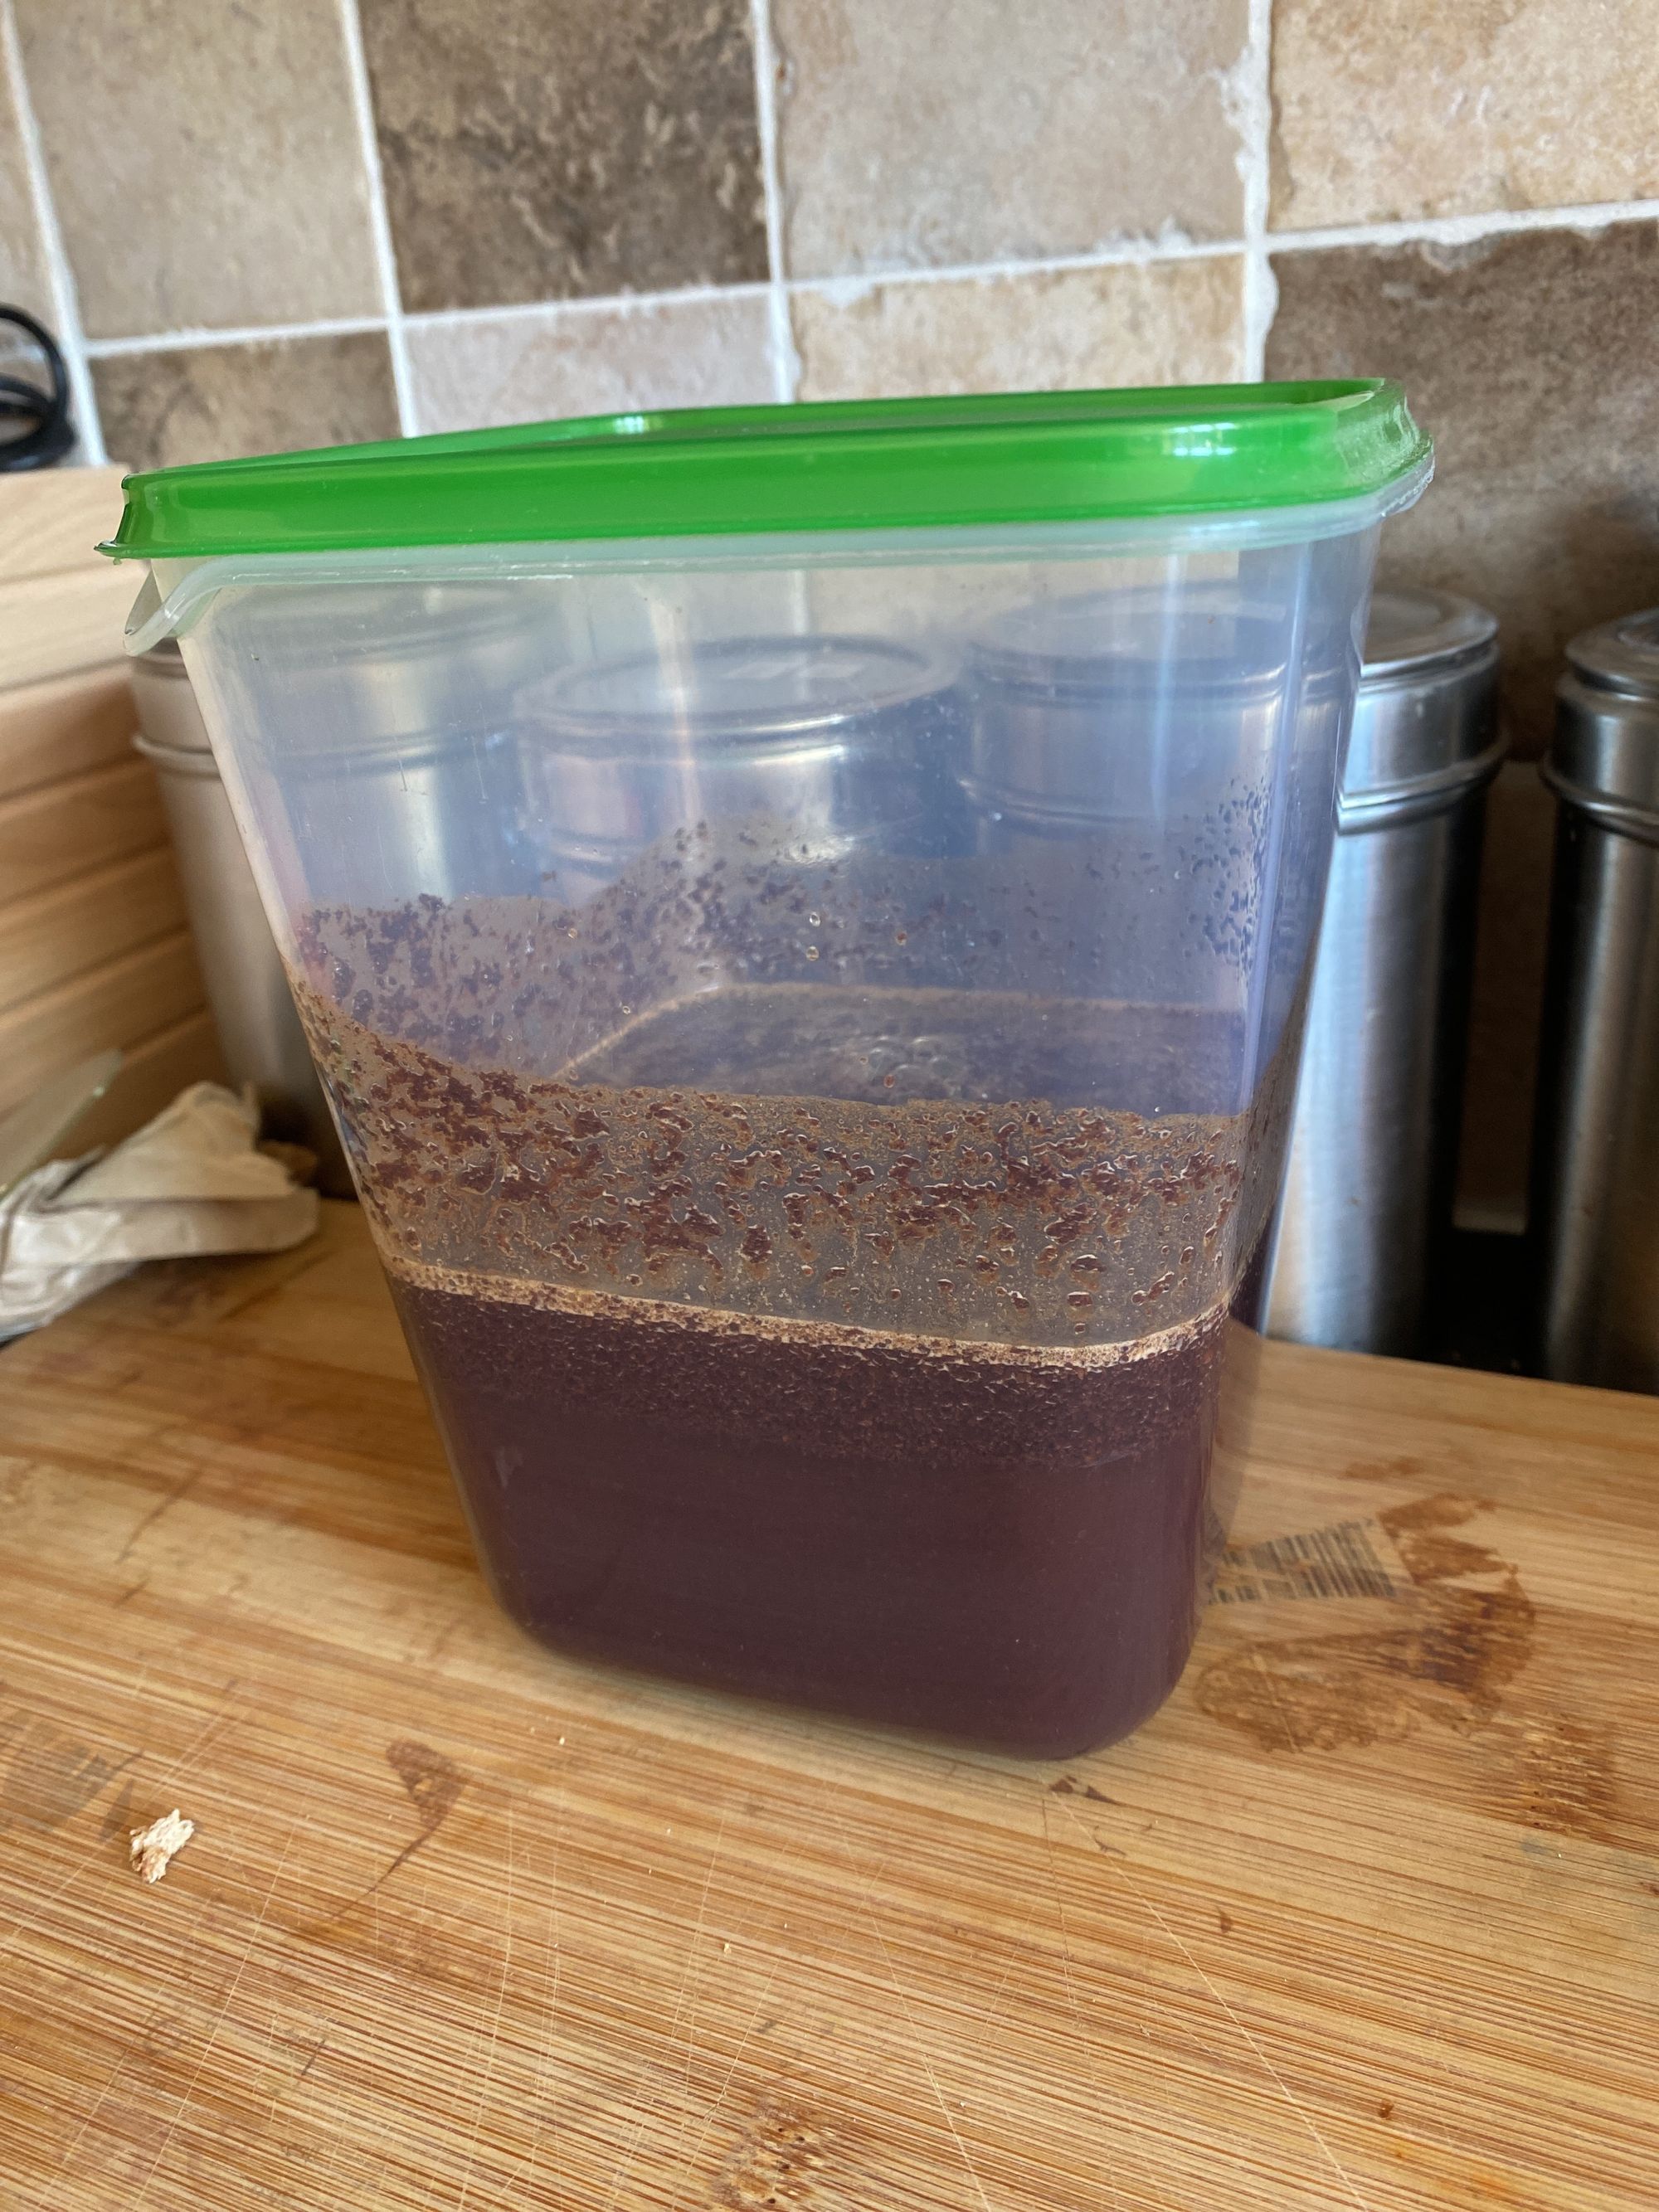 Coffee brewing in a large plastic tub with a green lid